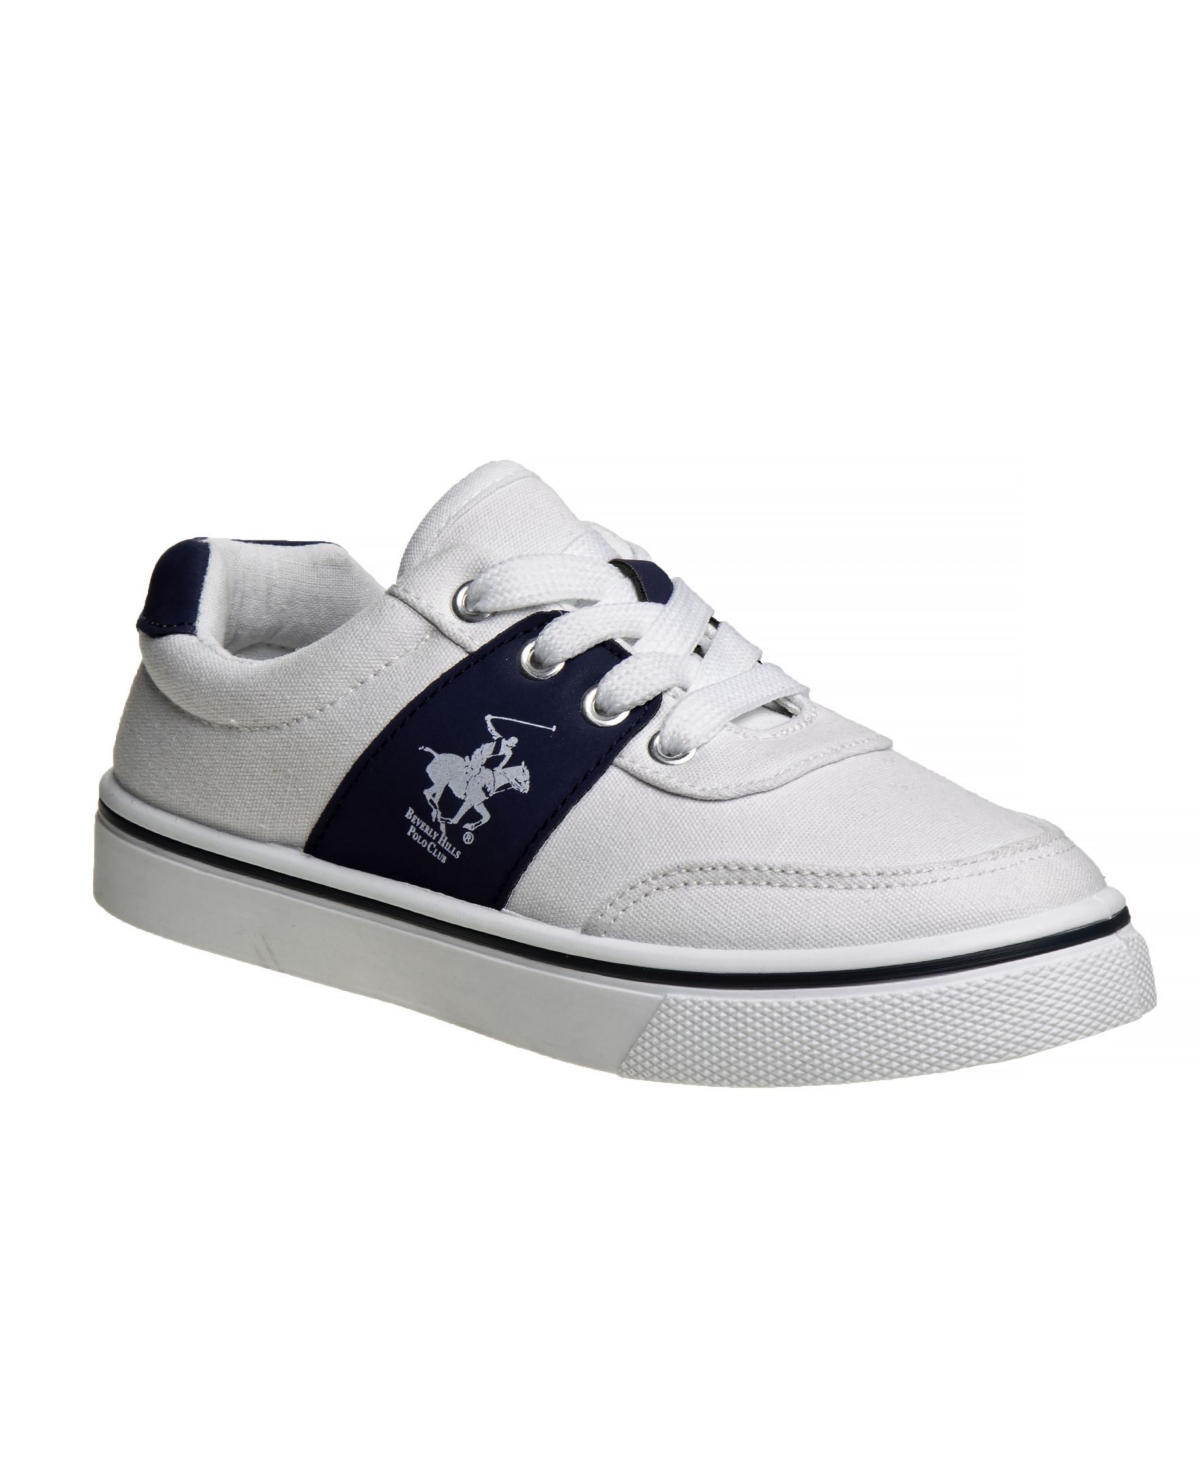 BEVERLY HILLS POLO CLUB BIG BOYS CANVAS SNEAKERS